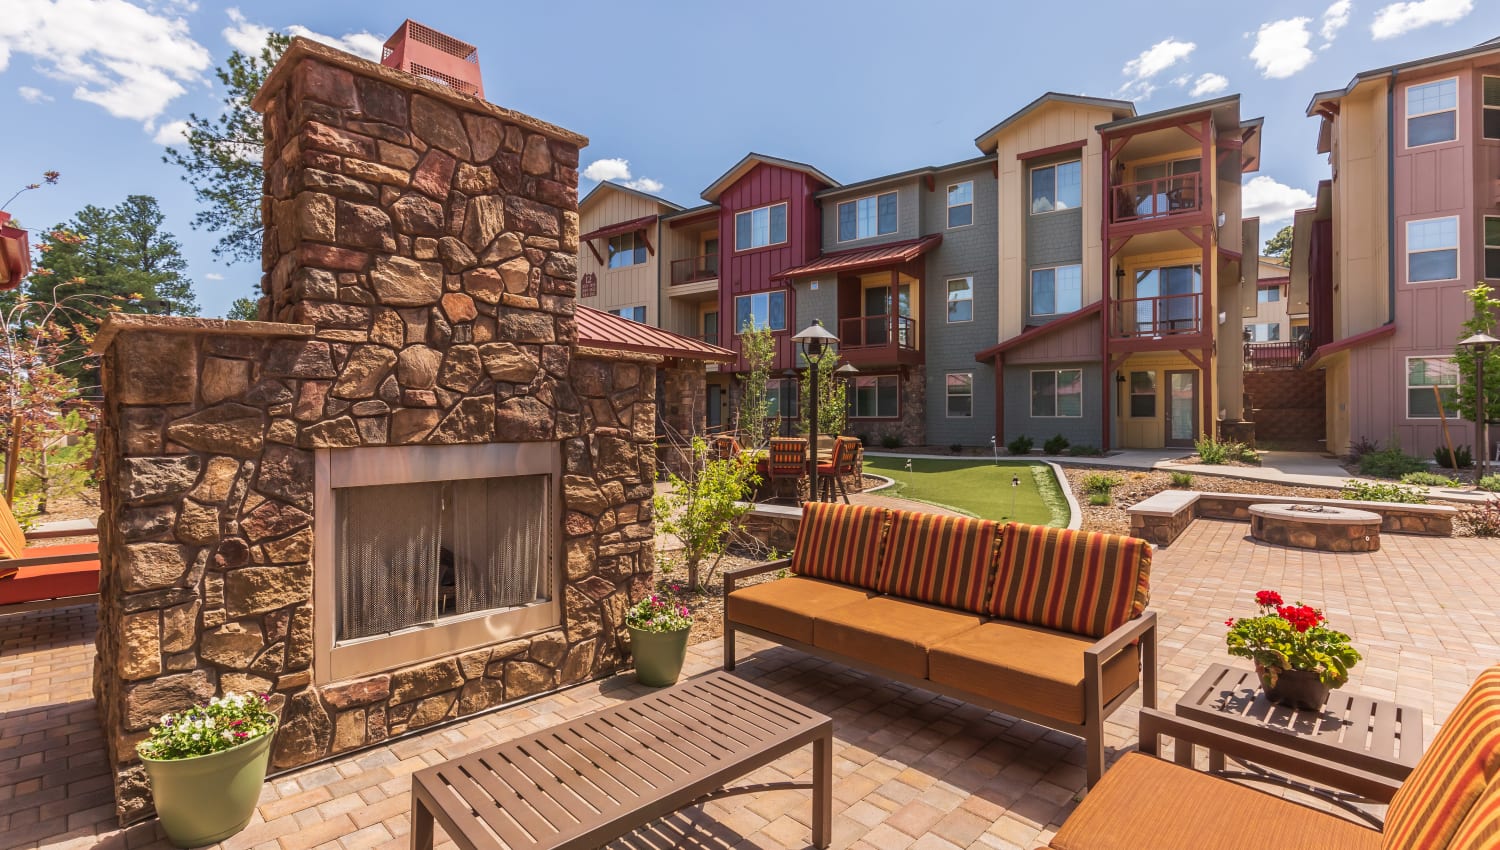 Outdoor fireplace at Mountain Trail in Flagstaff, Arizona